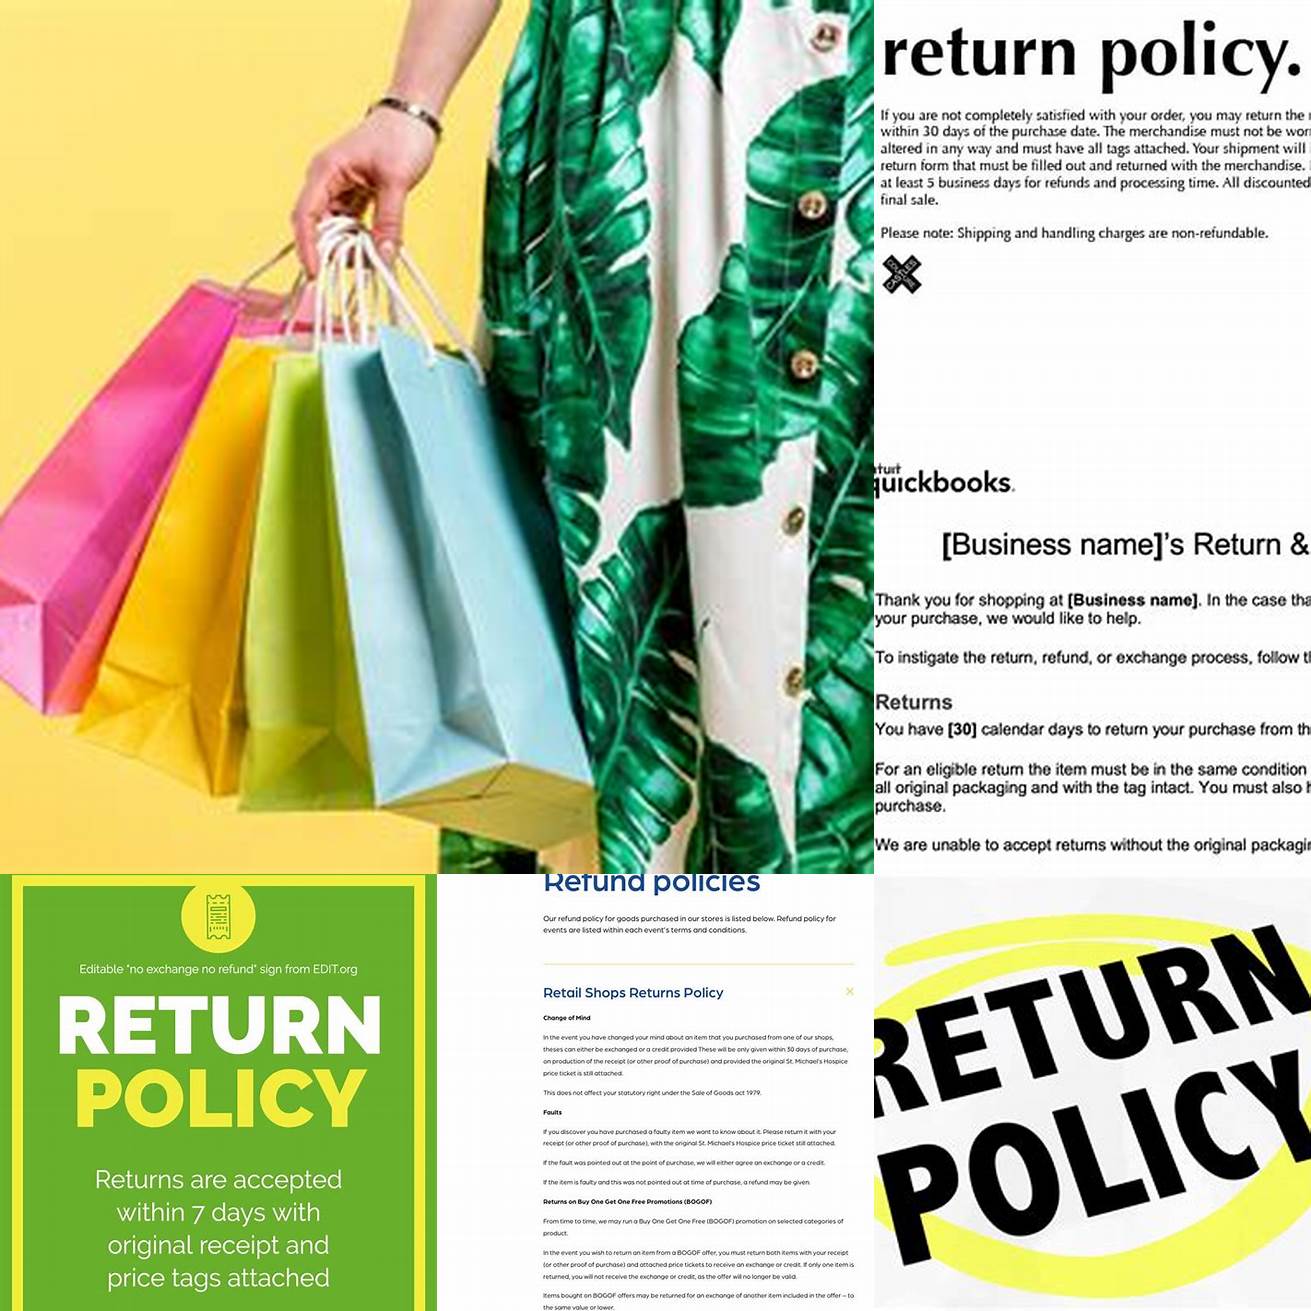 Check the Return Policy